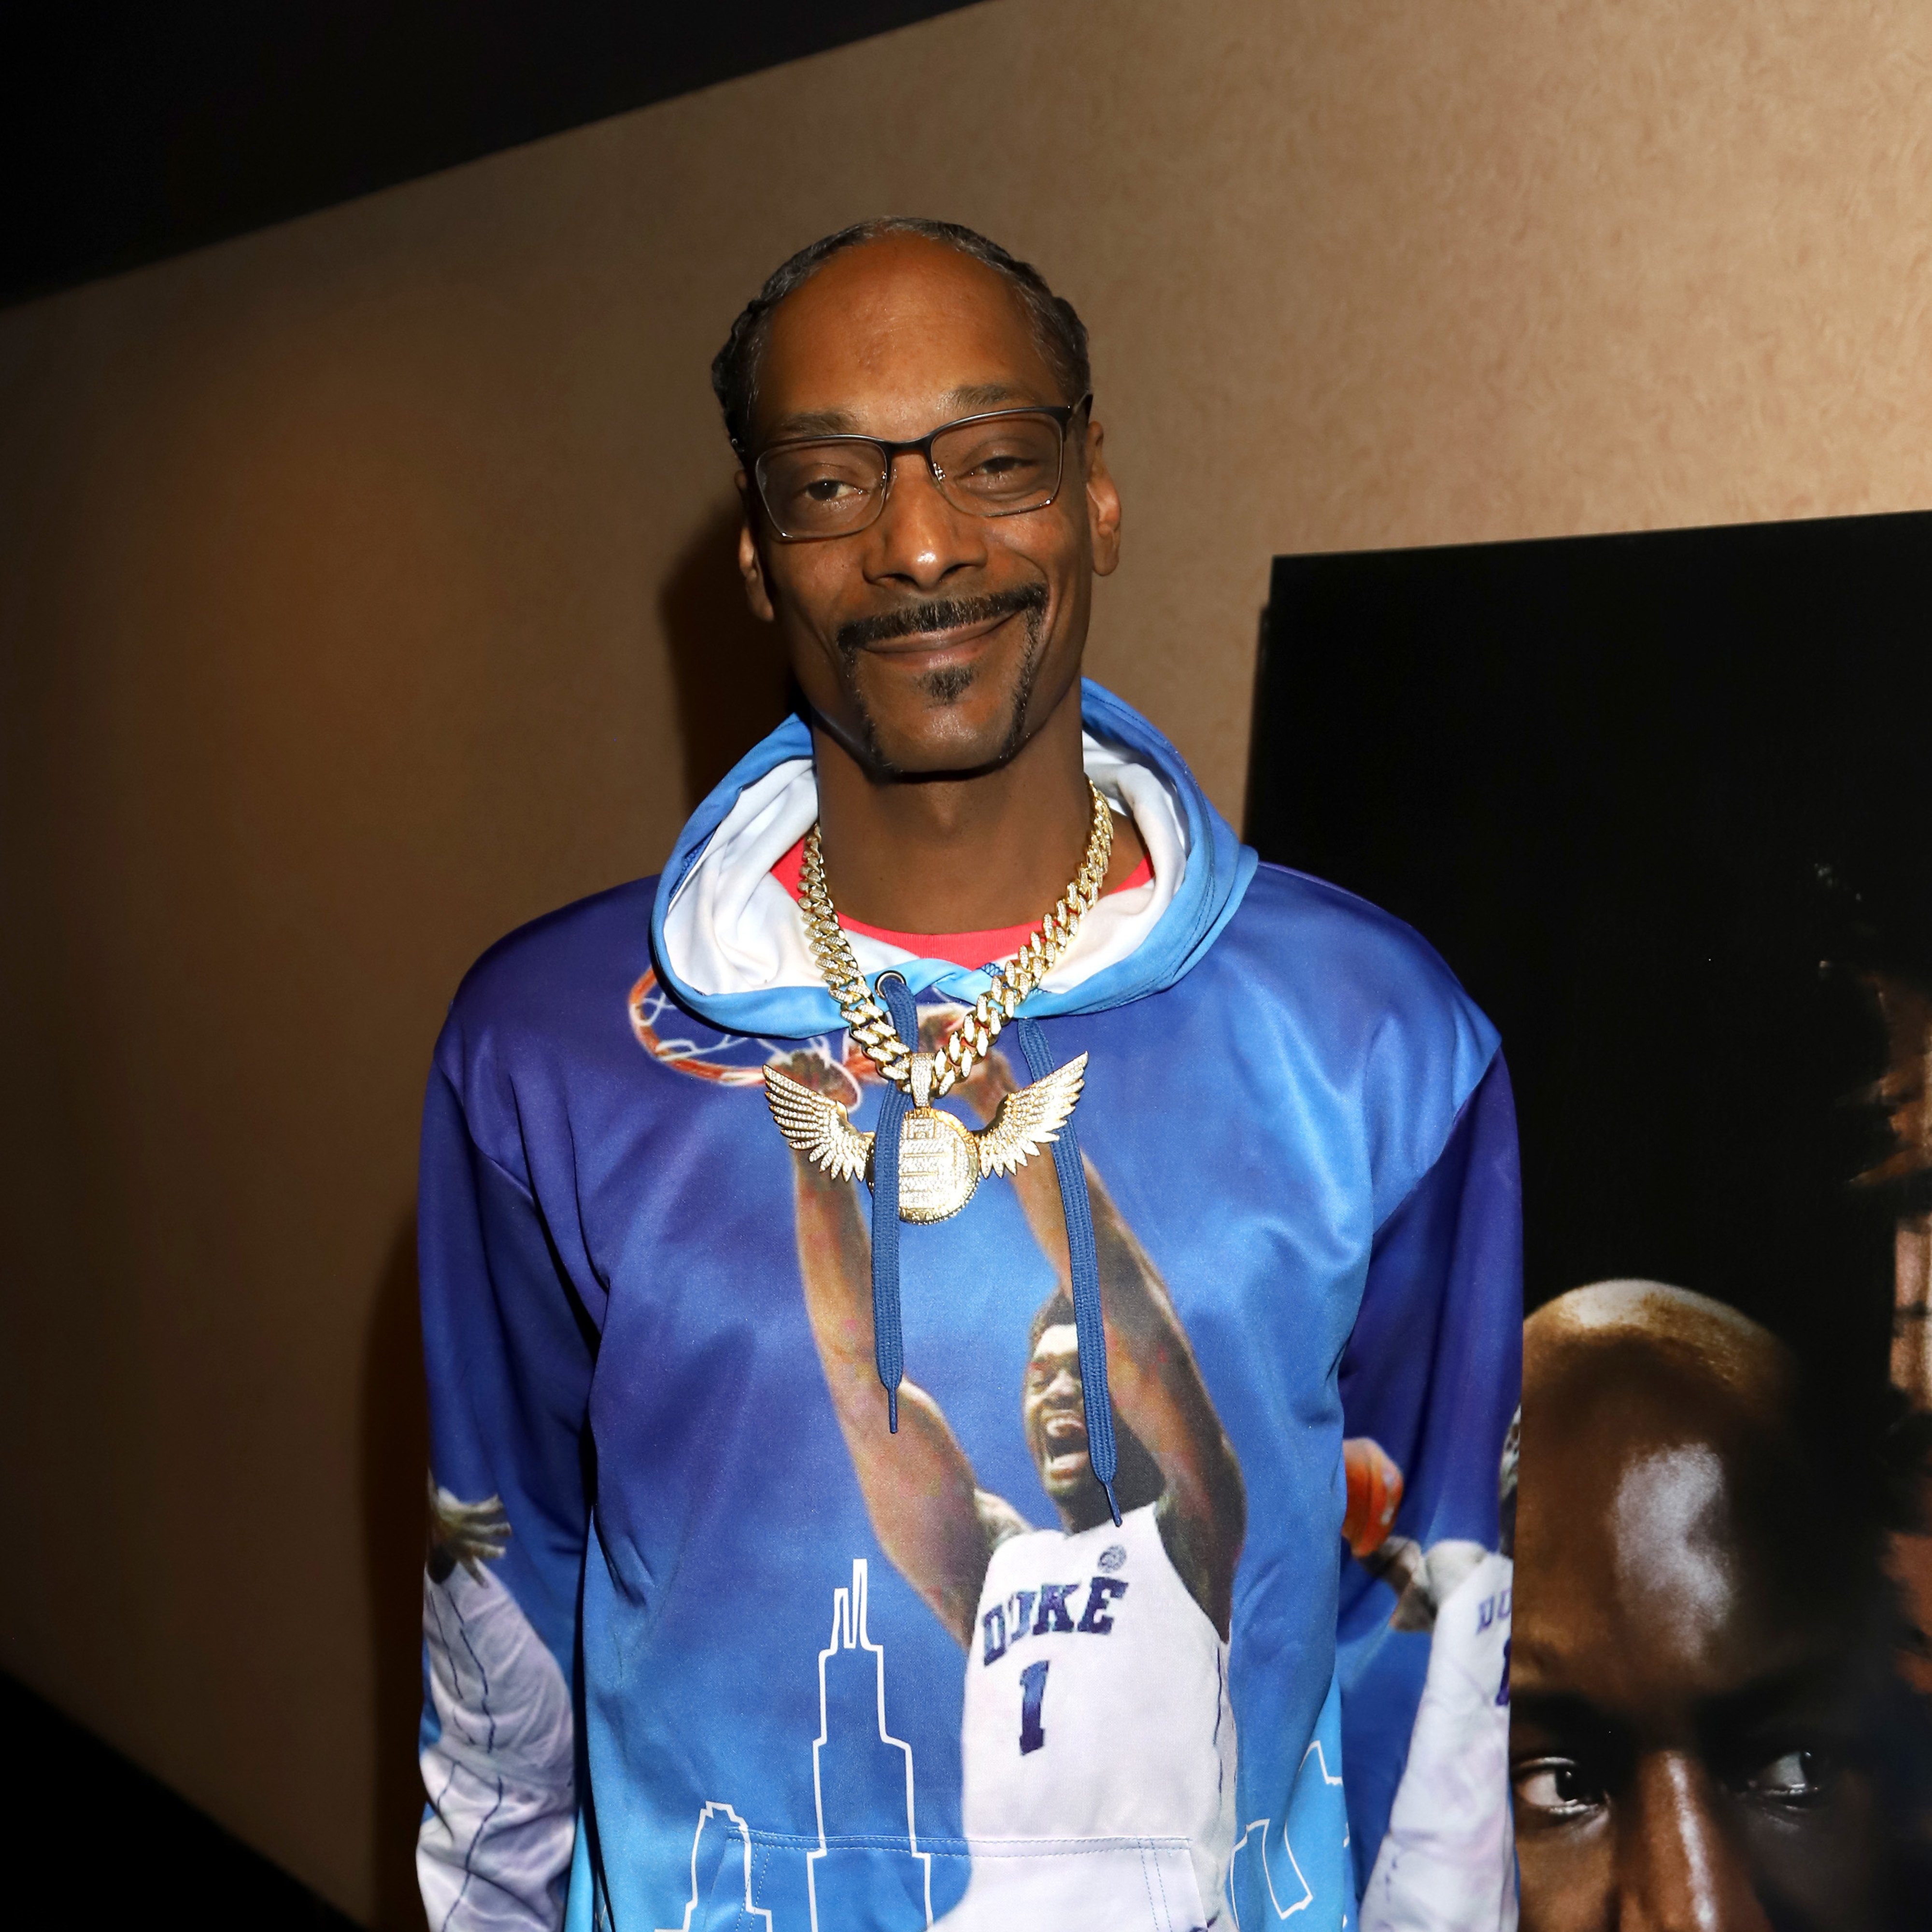 Snoop Dogg attends the Los Angeles Influencer Special Screening of Sony Pictures' "BLACK AND BLUE," hosted by Terrence J and Director Deon Taylor at ArcLight Hollywood on October 17, 2019. | Photo: Getty Images